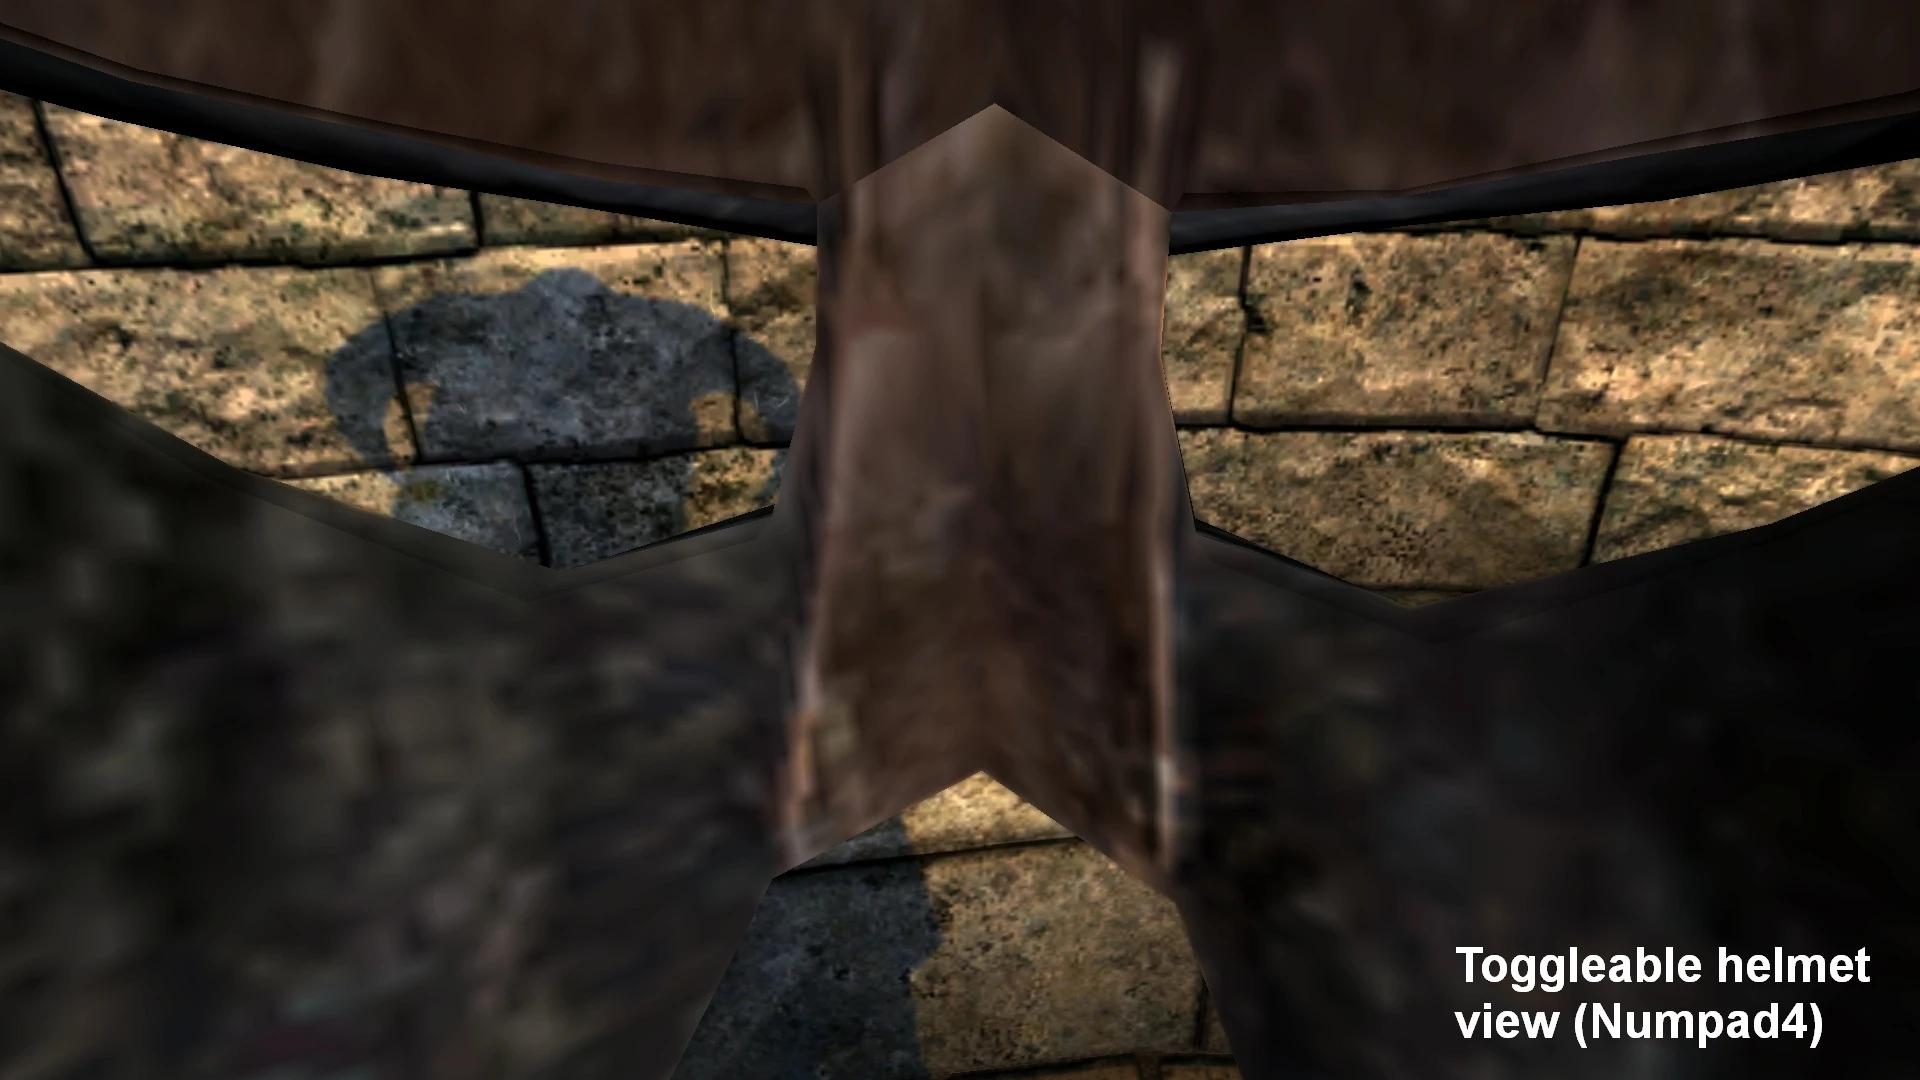 Immersive first. Skyrim 1 person. Skyrim Special Edition immersive first person view. Тропический сексрим DD 3.0 финал осенне-зимний аддон. Immersive first person view Bug.